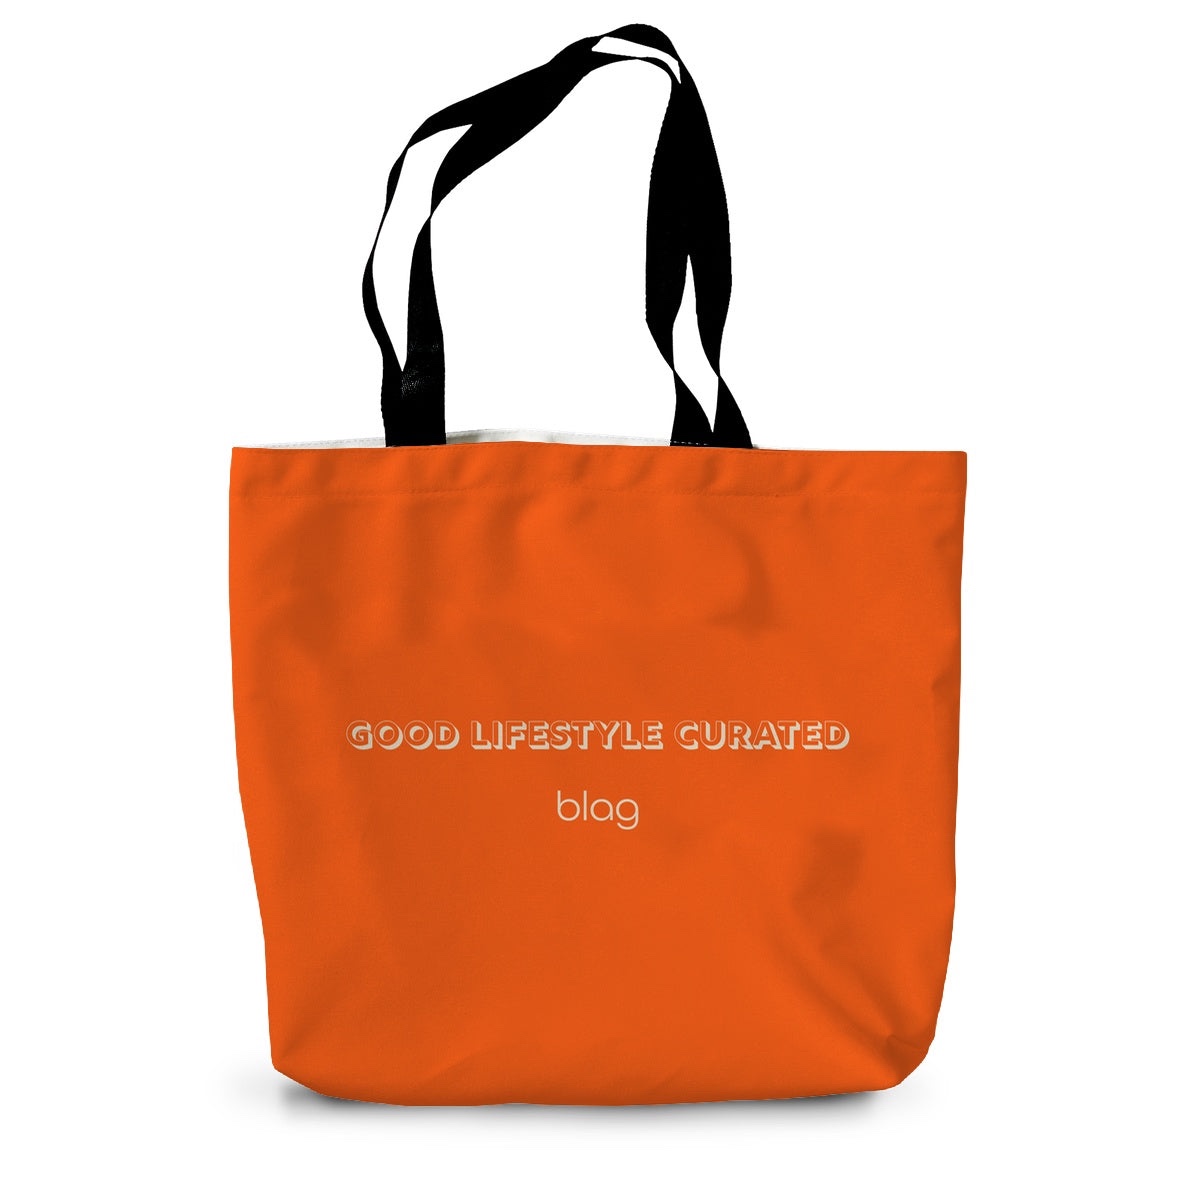 Good Lifestyle Curated x BLAG Shopping Bag